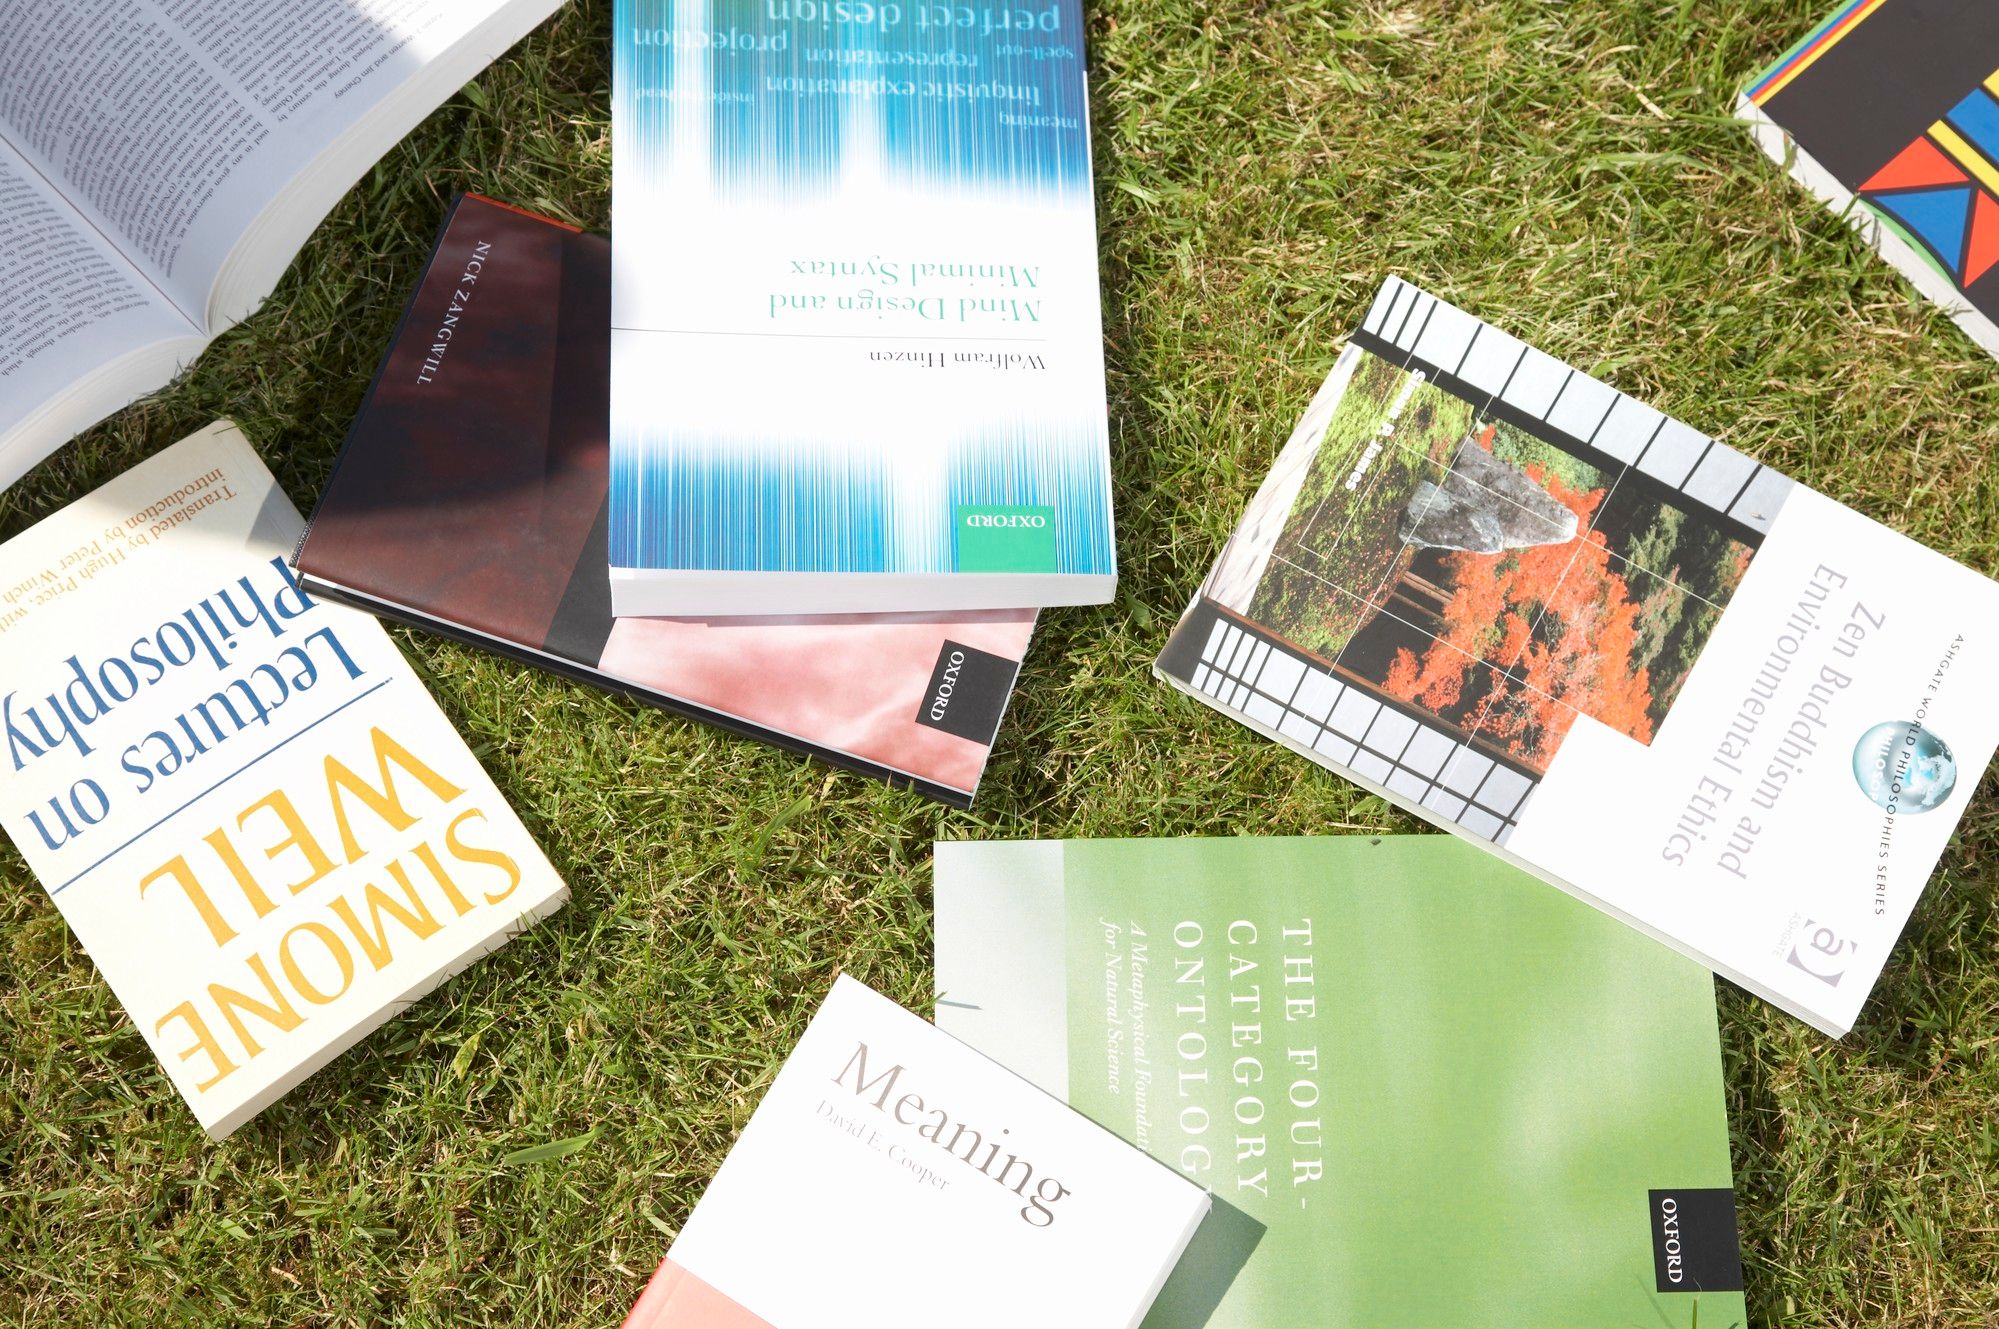 Philosophy books placed on grass